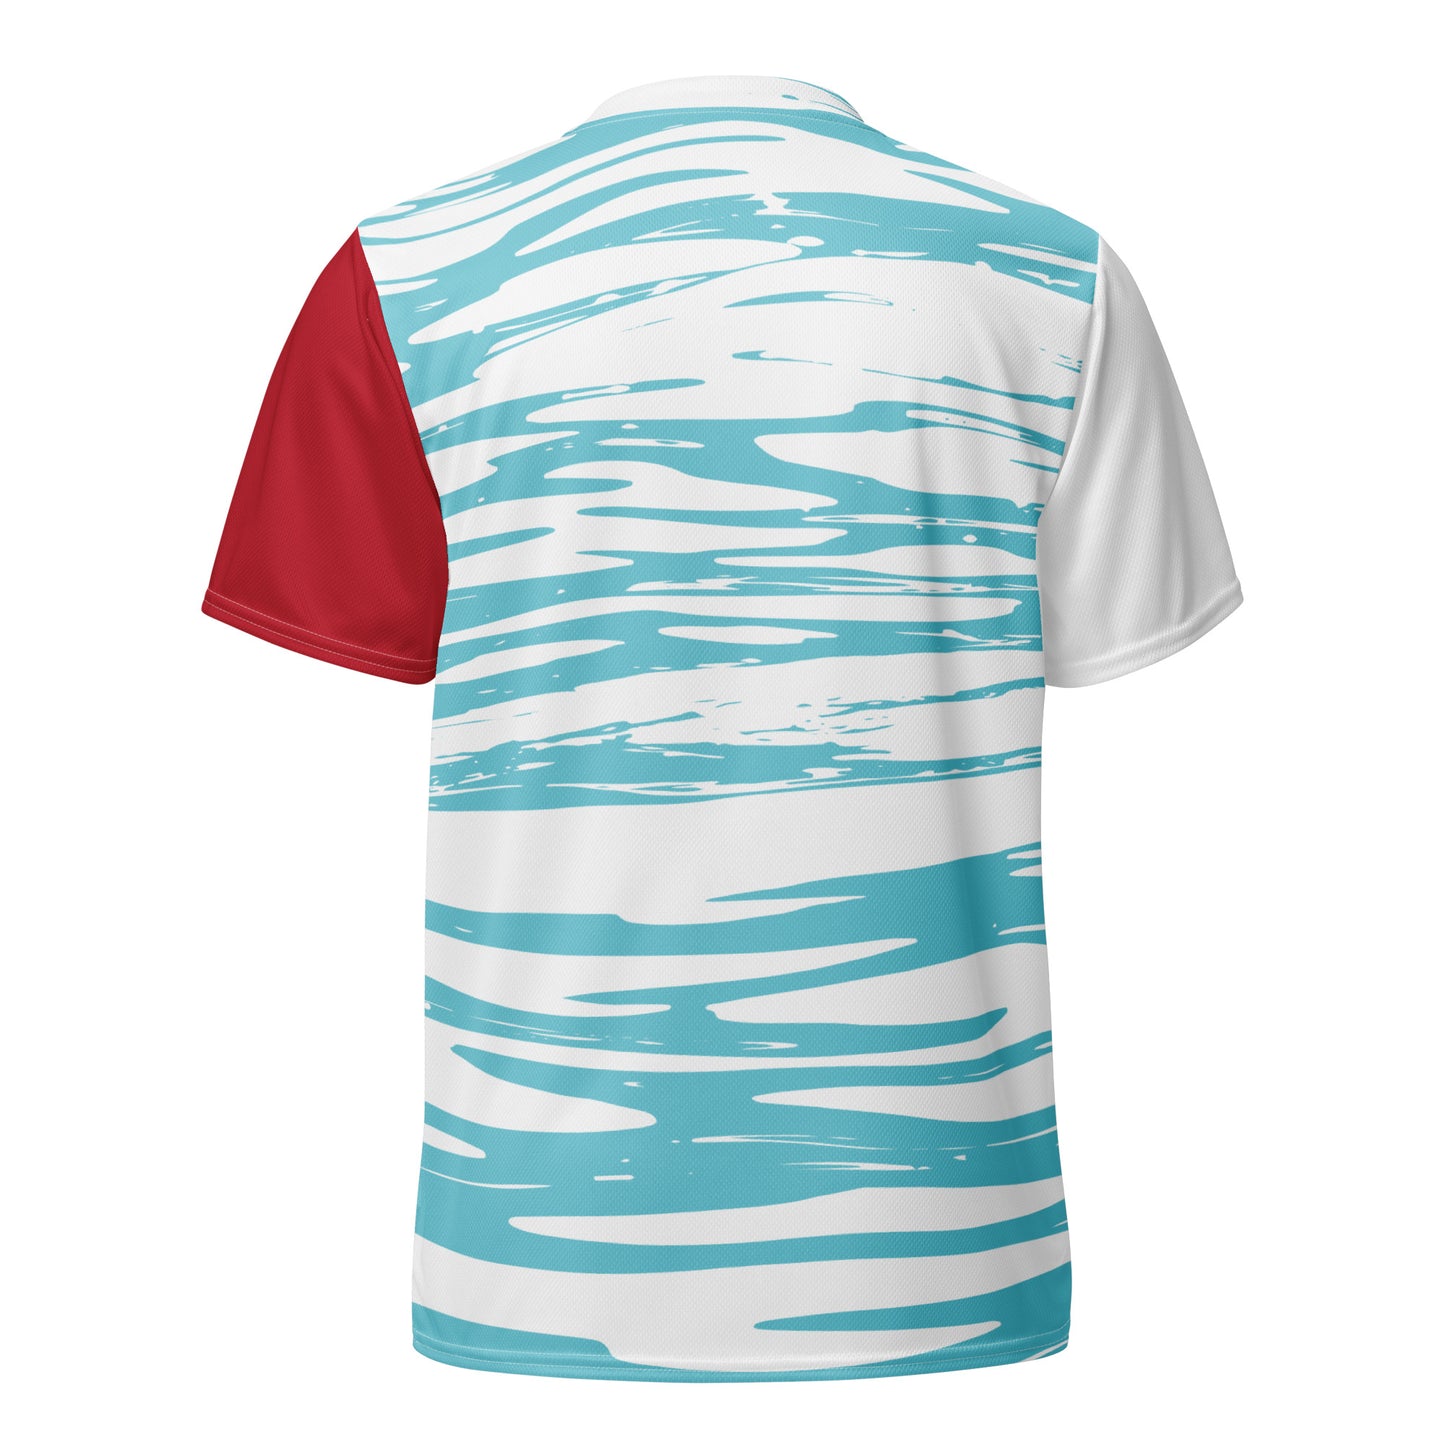 Shark, recycled sports t-shirt